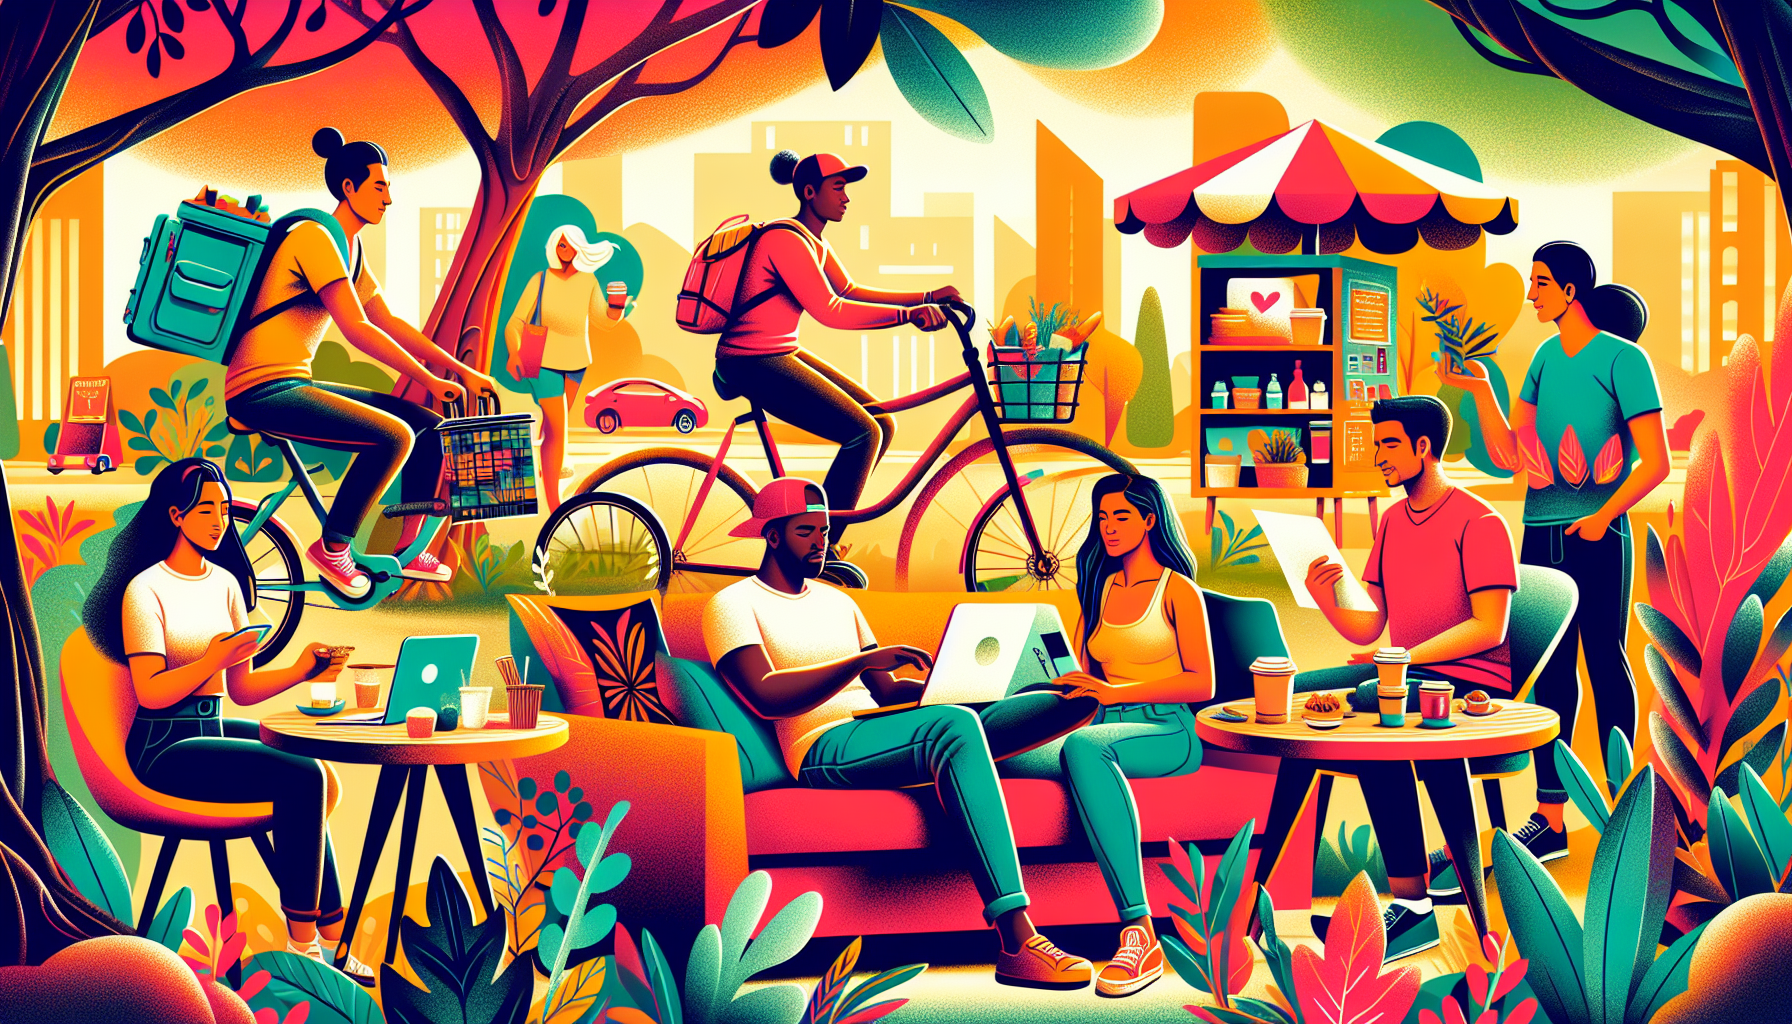 Create an illustration showcasing a diverse group of people engaging in various side hustles. Include someone driving for a ride-share service, a person delivering food on a bike, another selling homemade crafts online, a freelancer working on a laptop in a cozy café, and a tutor teaching a student in a park. The overall scene should be vibrant and dynamic, conveying the spirit of entrepreneurship and income-boosting activities.